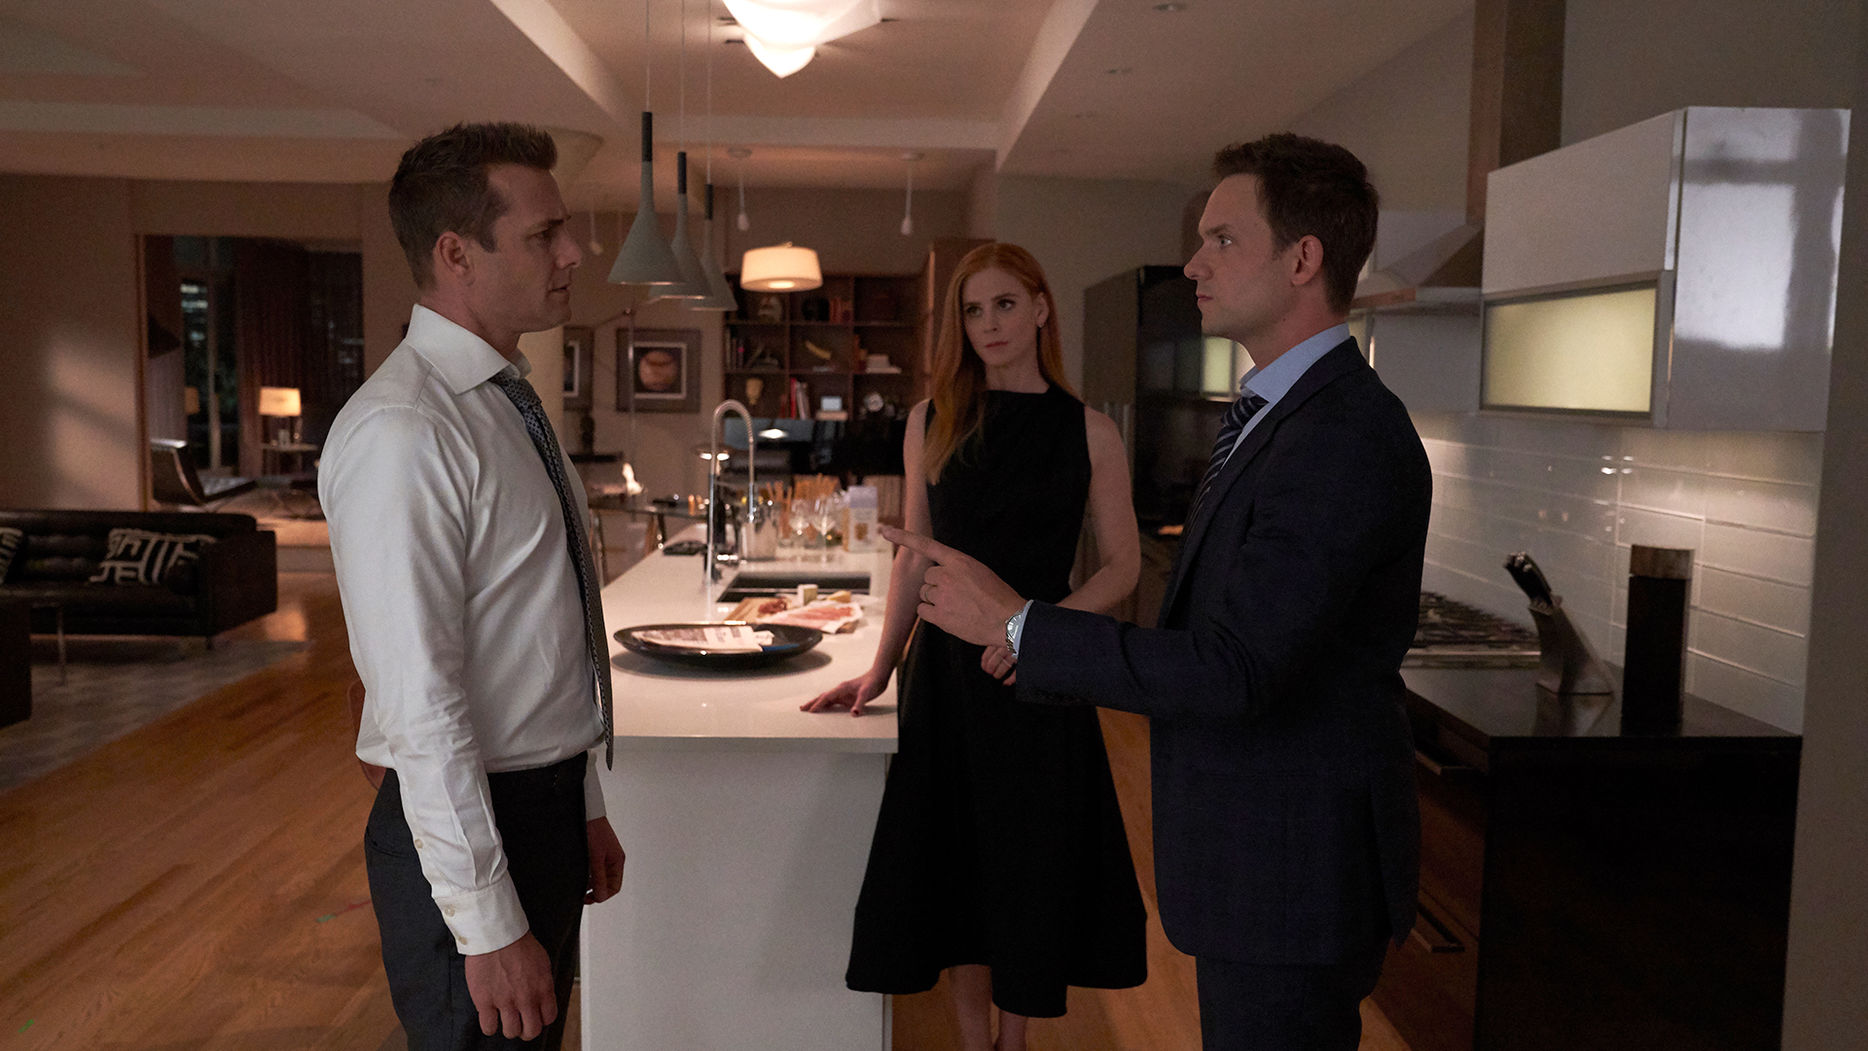 Suits Season 9: How many Episodes are left Before the Finale